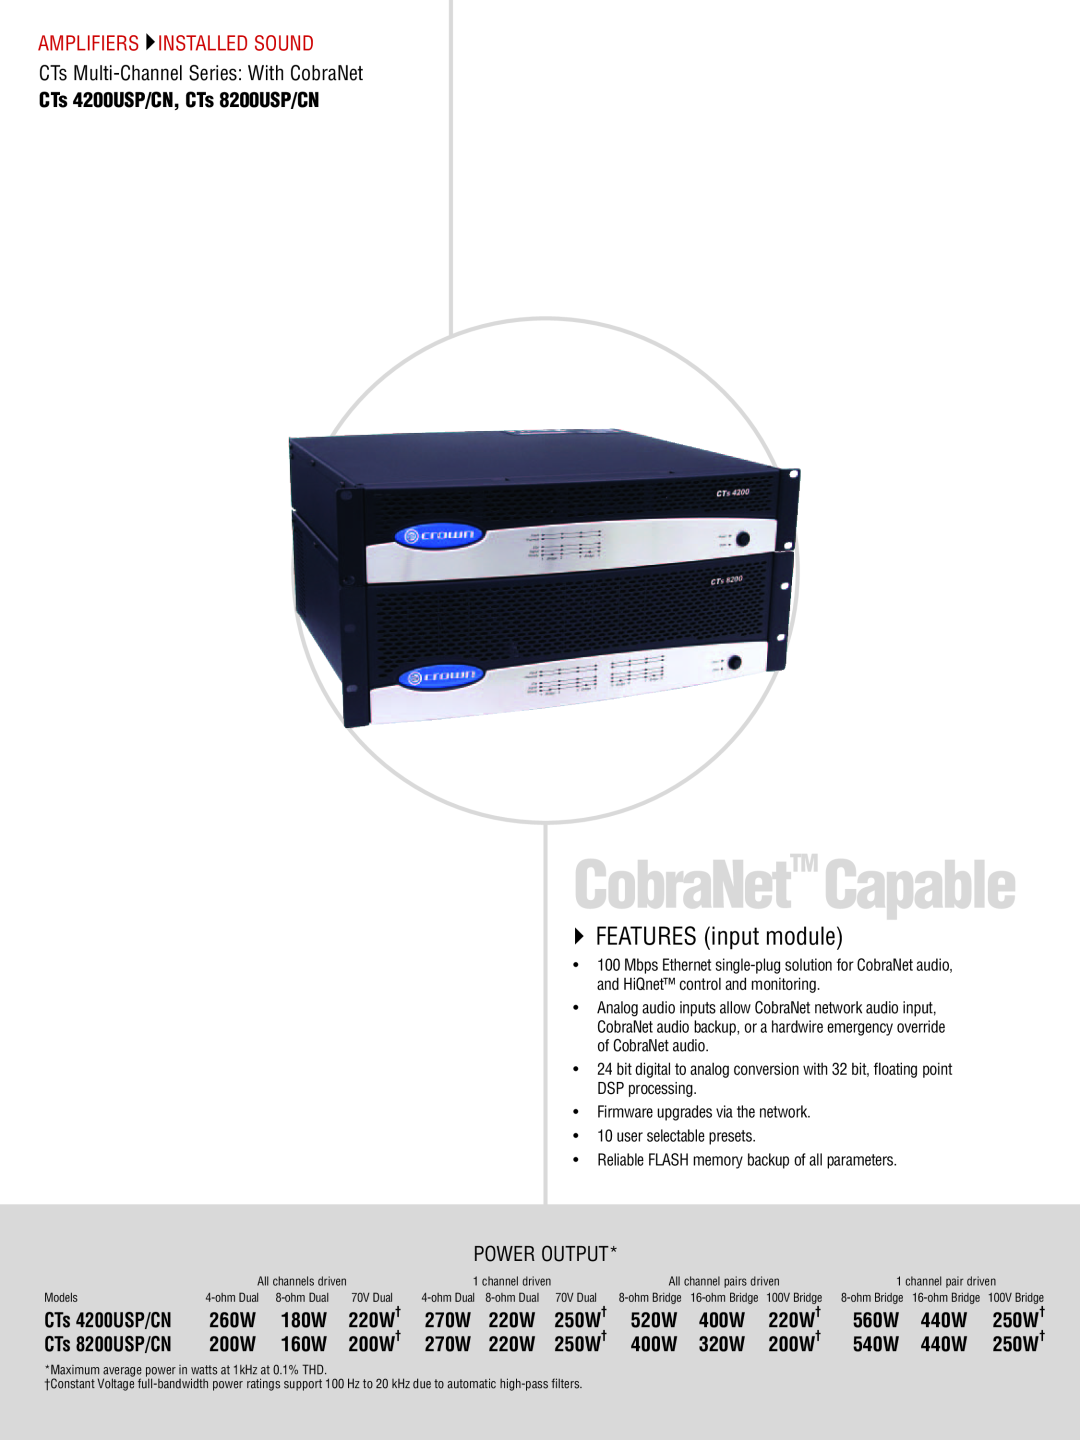 Crown CTS 3000, CTS 2000, CTS 1200, CTS 600 manual `` FEATURES input module, CobraNetTM Capable, Amplifiers Installed Sound 